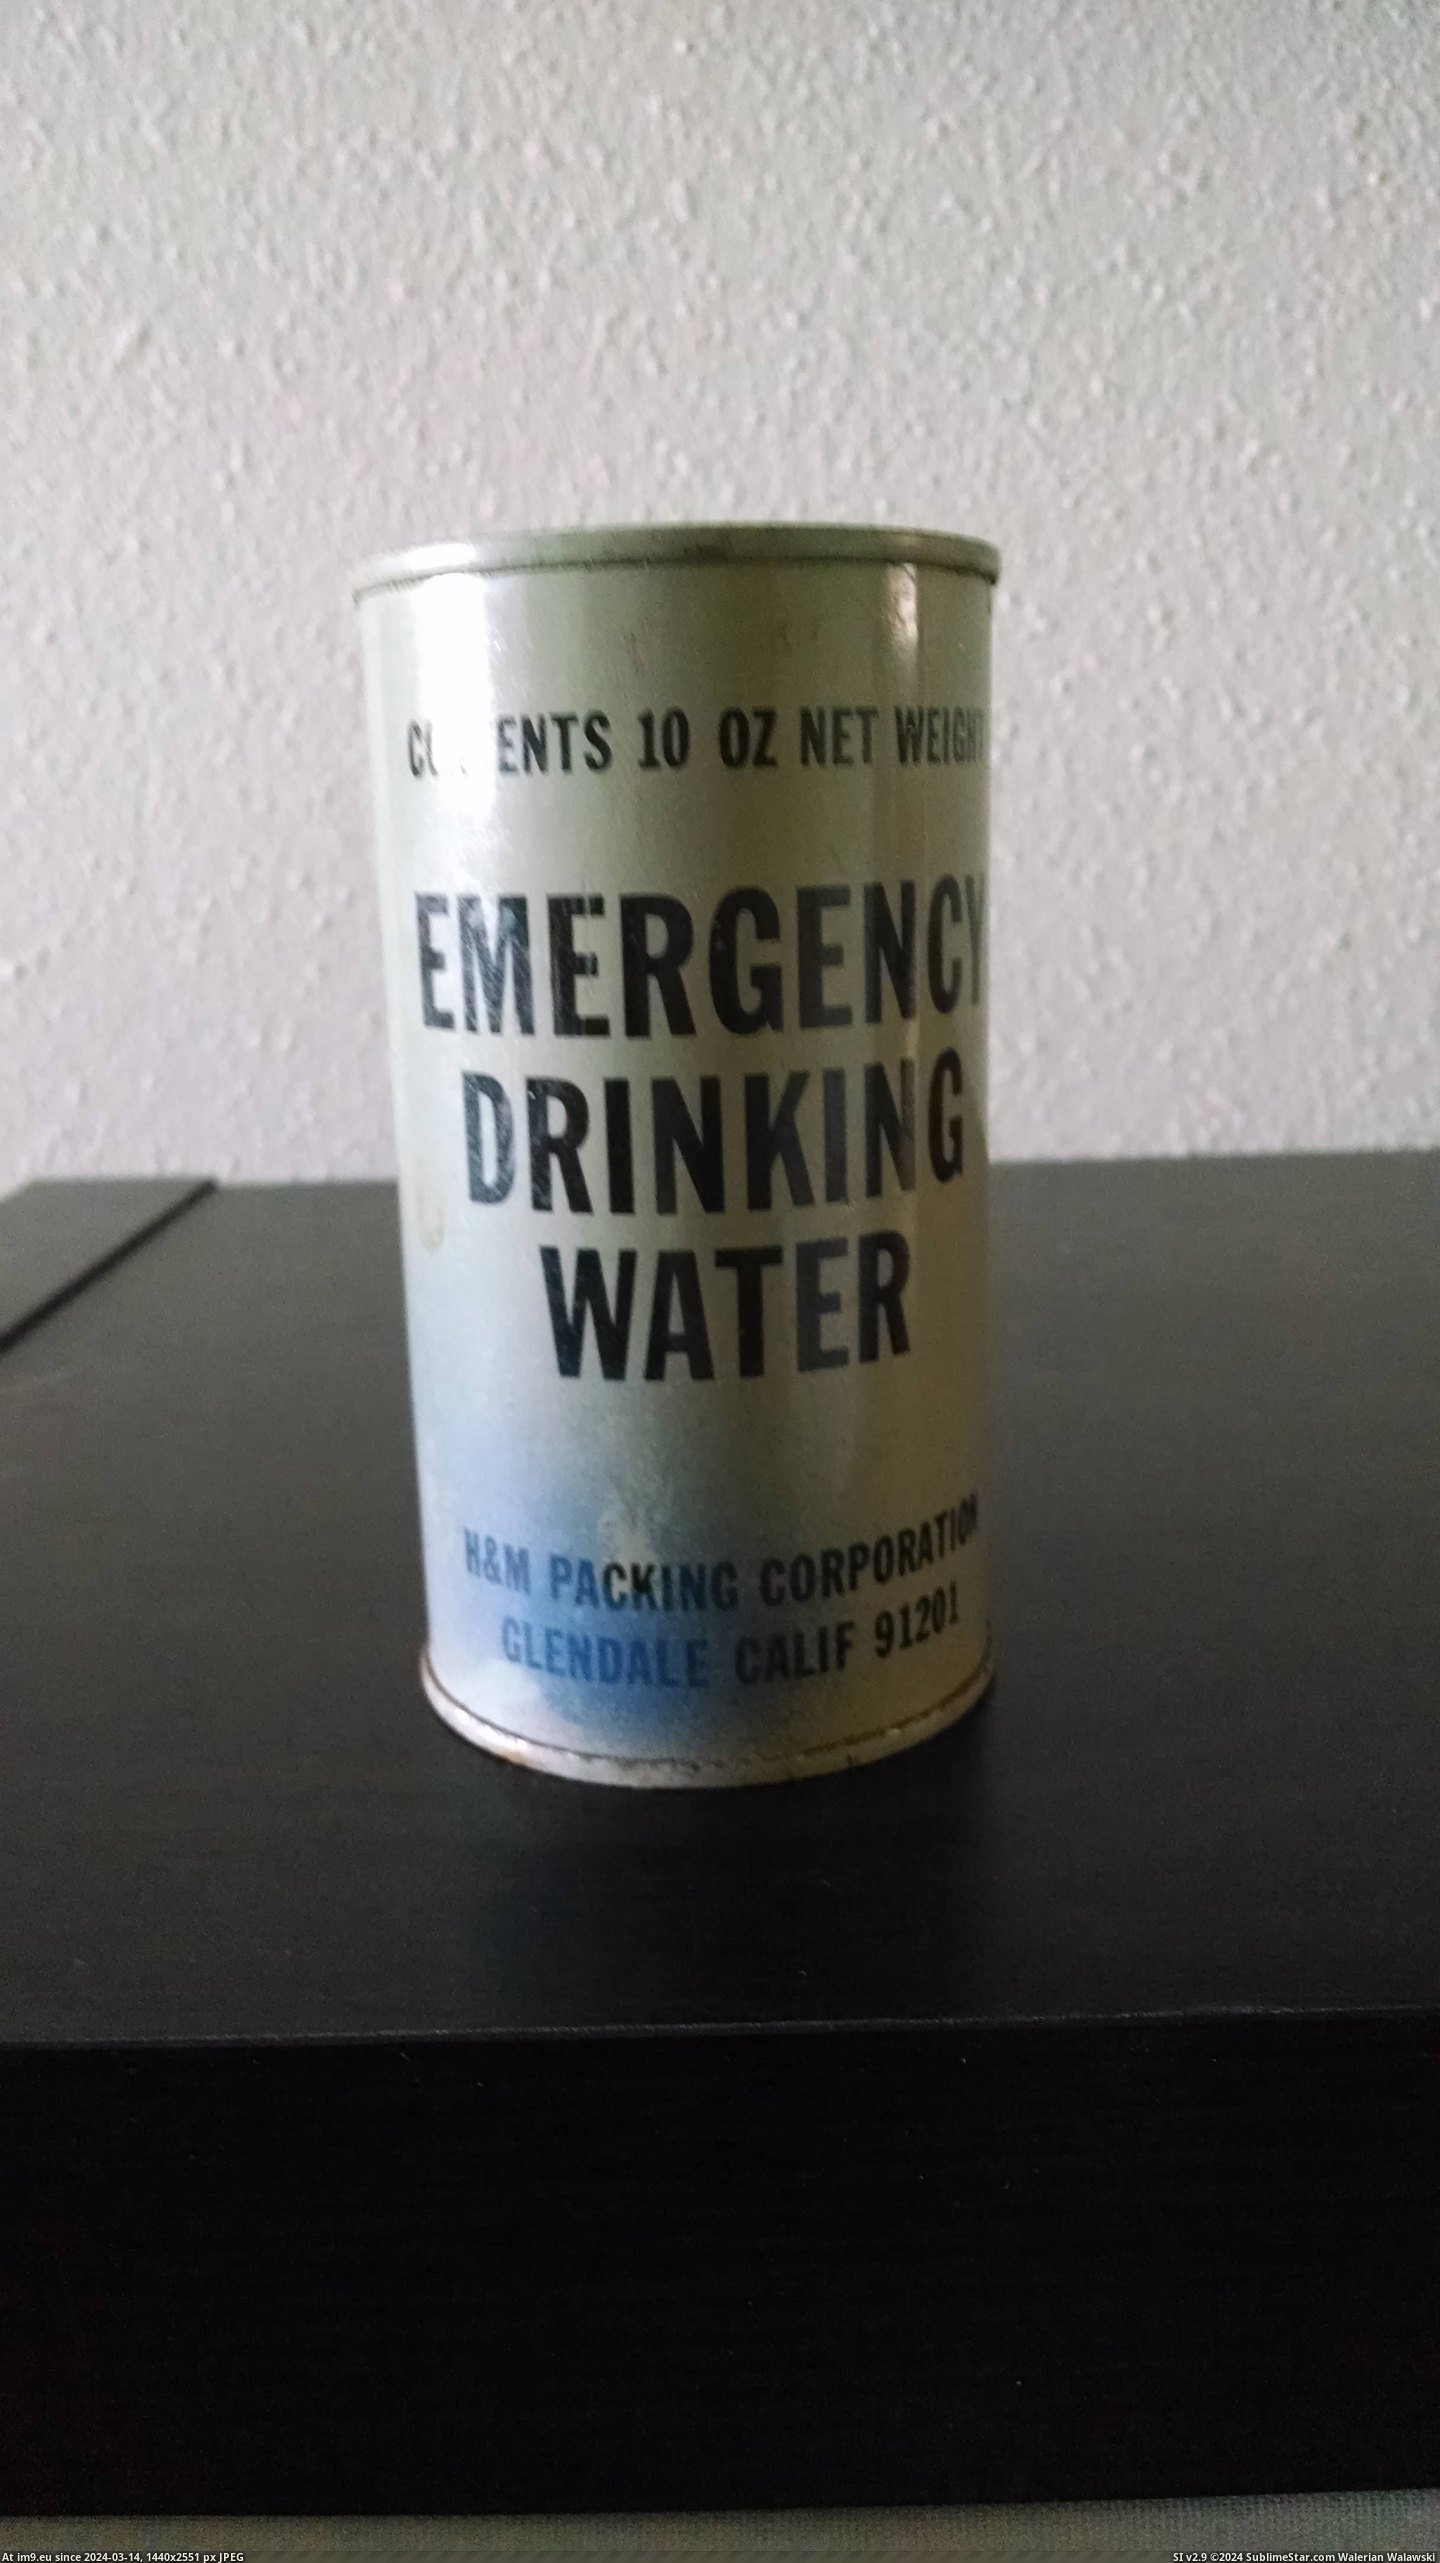 #Full #Dad #Water #Emergency #Breaker #Ice #Pulled #Ship [Mildlyinteresting] A can of emergency water made in 1969. My dad pulled it off of an ice breaker ship in 1976. Still full. Pic. (Изображение из альбом My r/MILDLYINTERESTING favs))